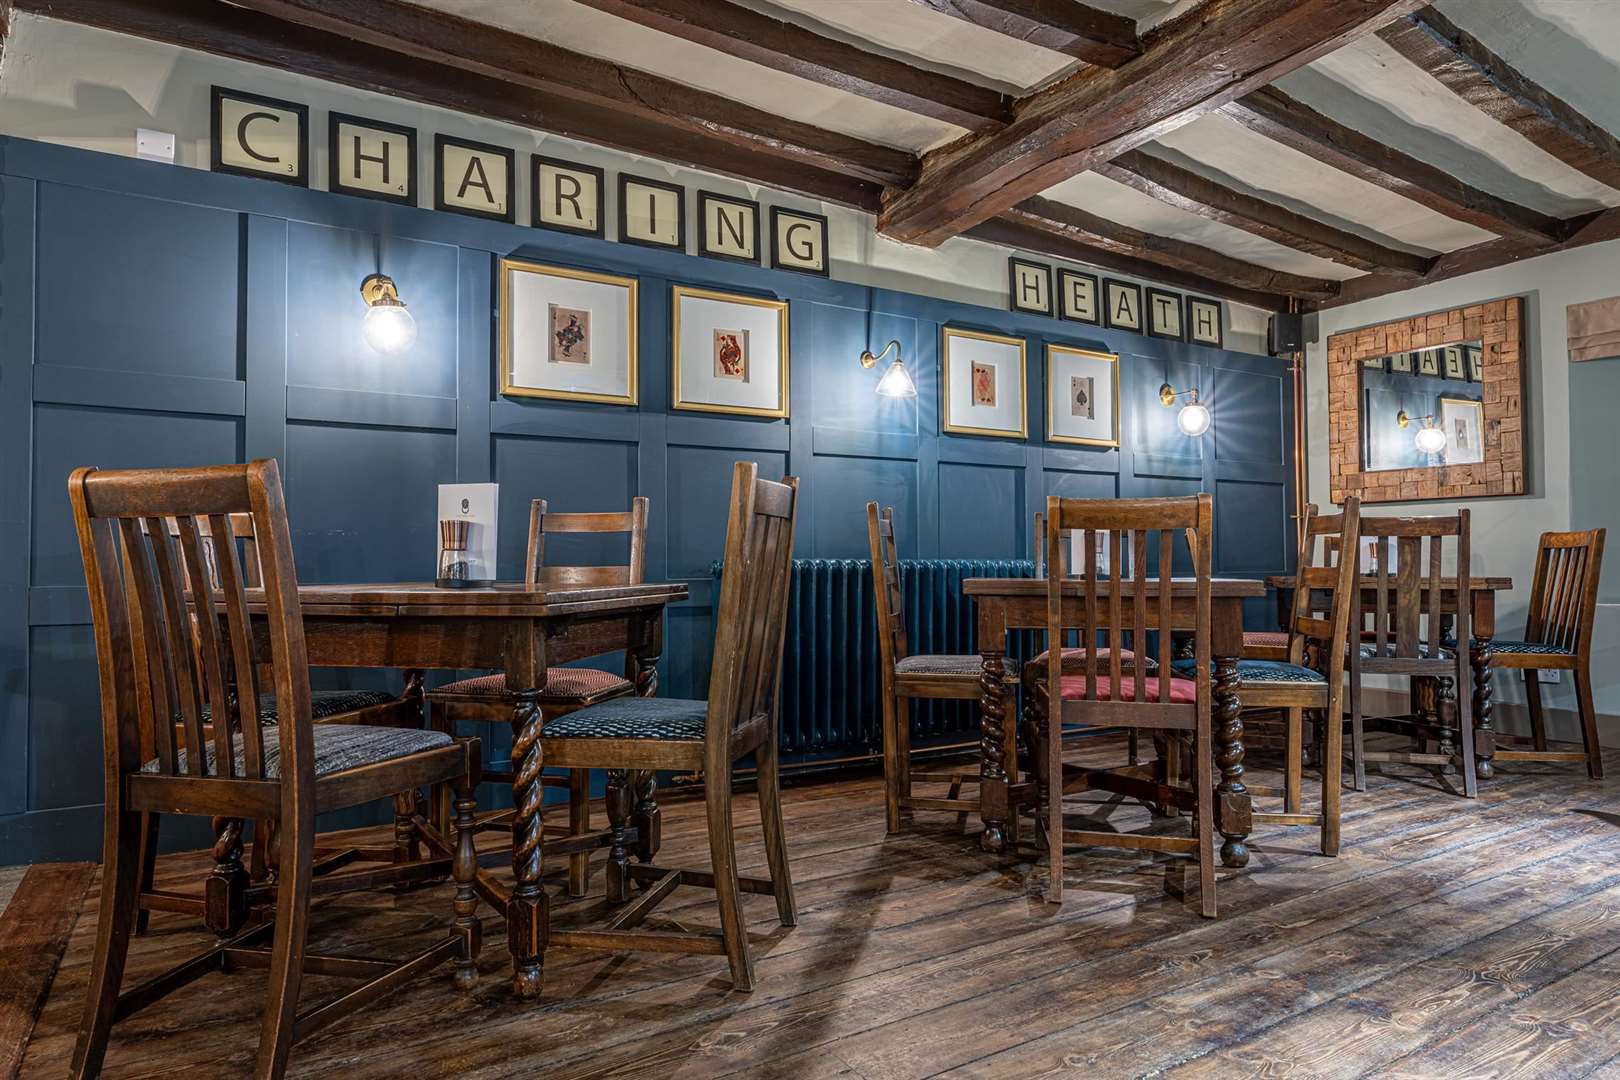 The Red Lion has reopened after a refurbishment